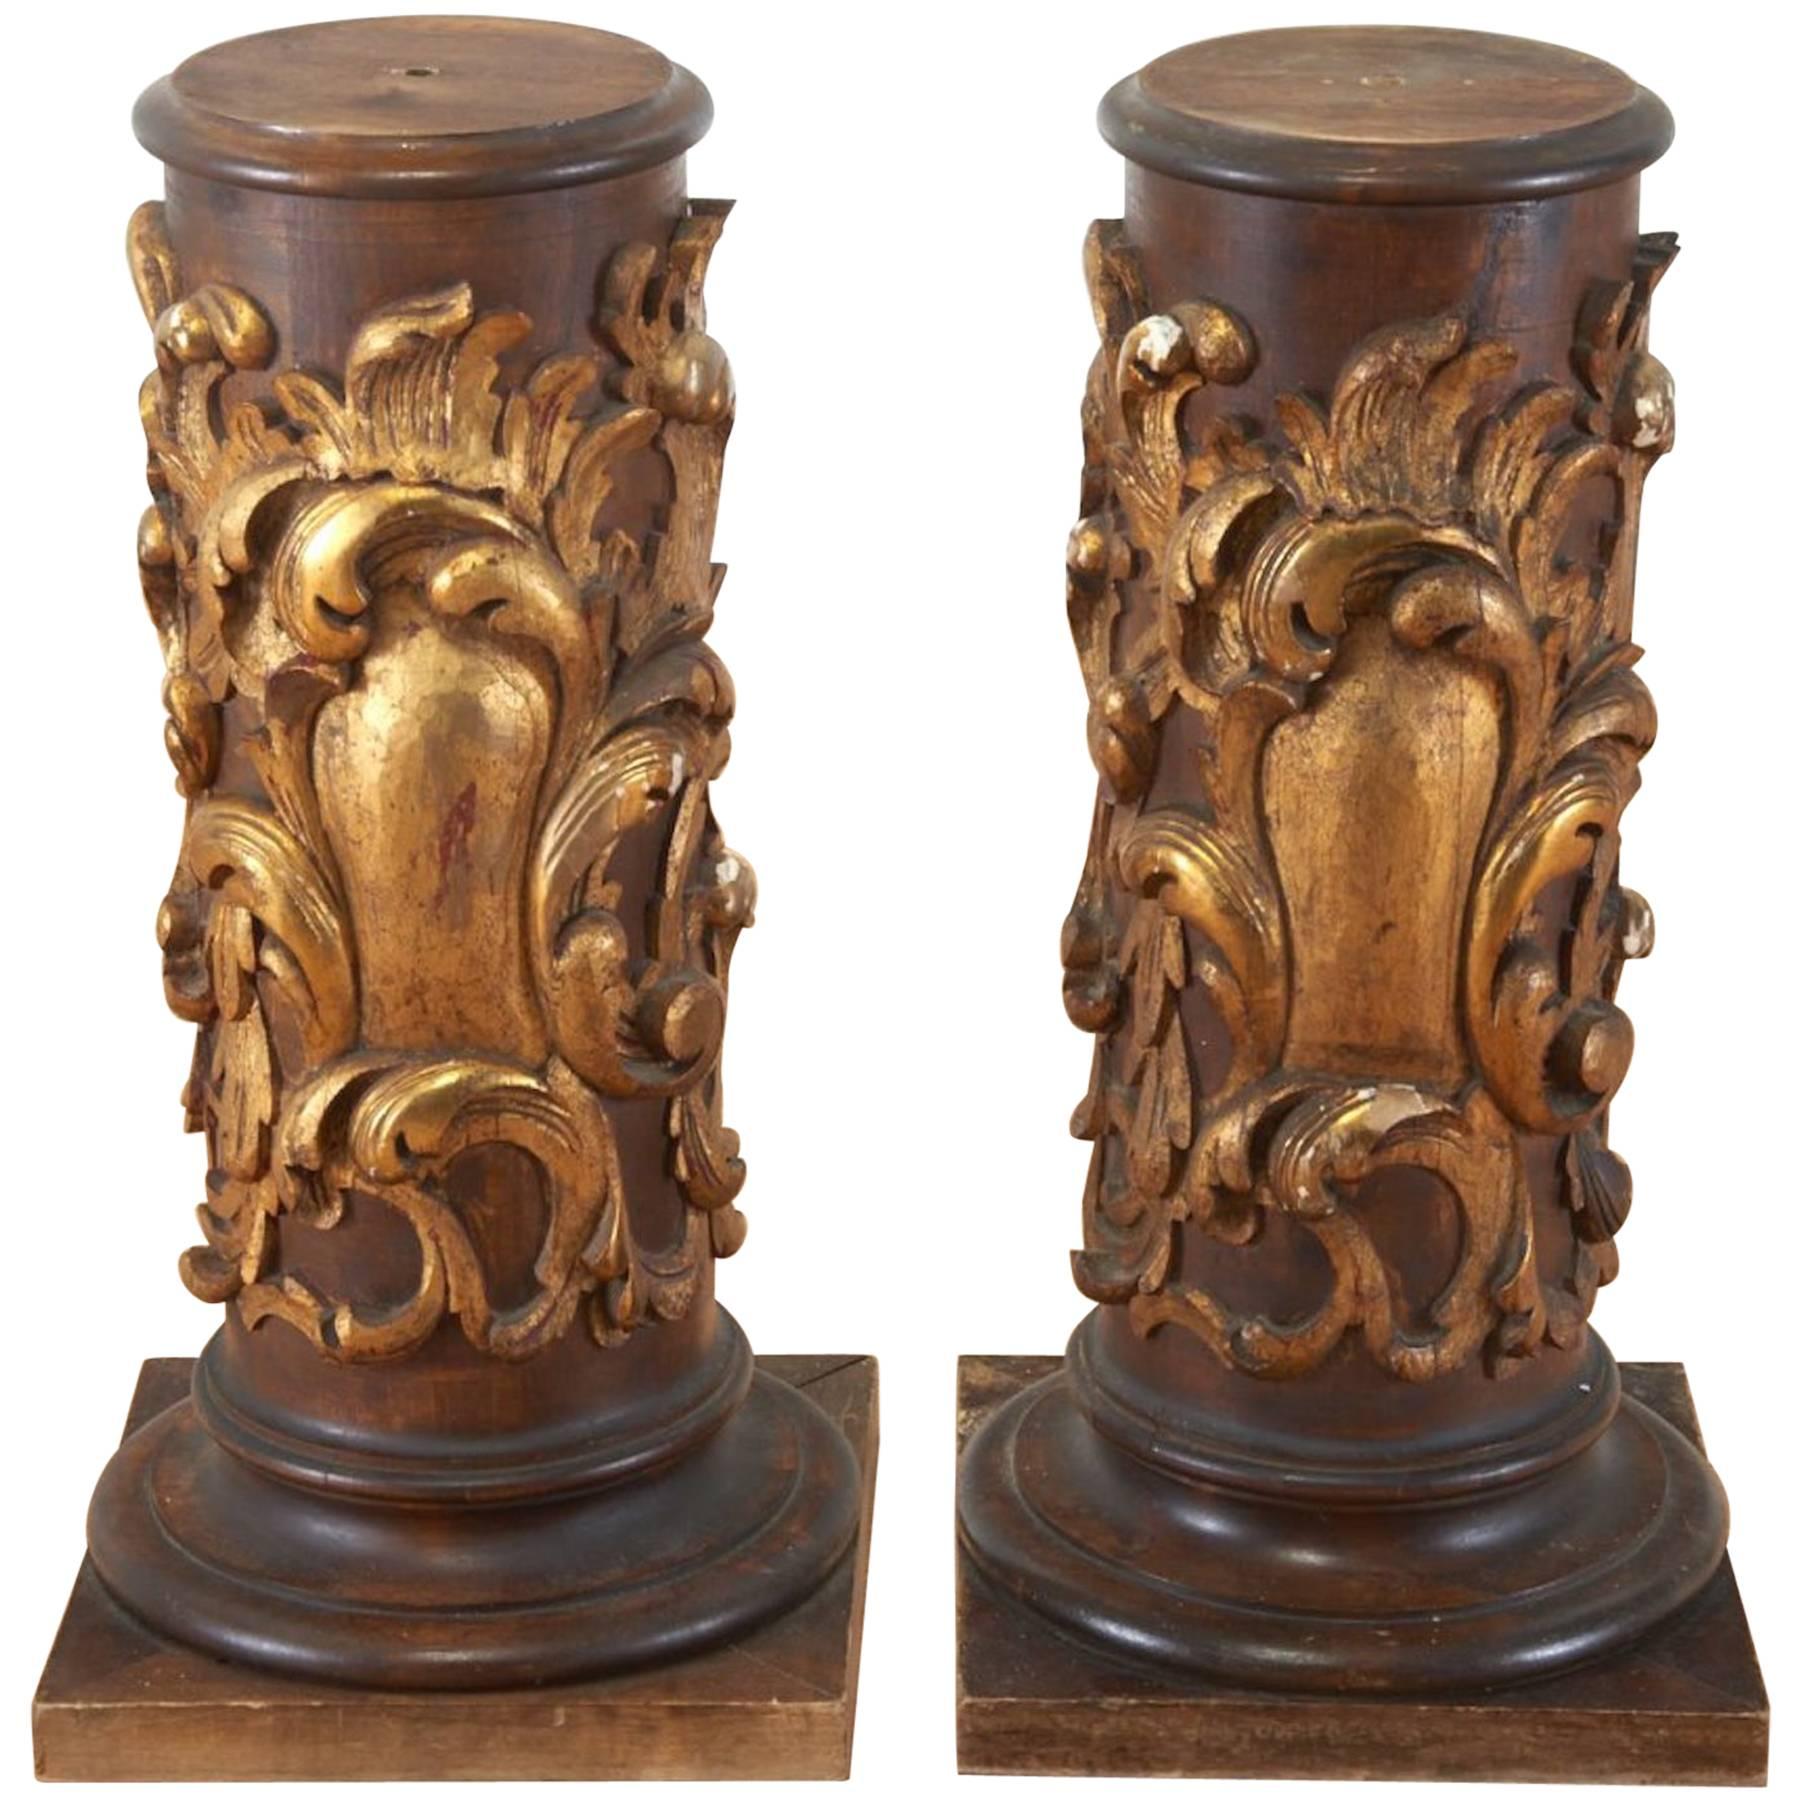 Pair of Diminutive Continental Carved Pedestals